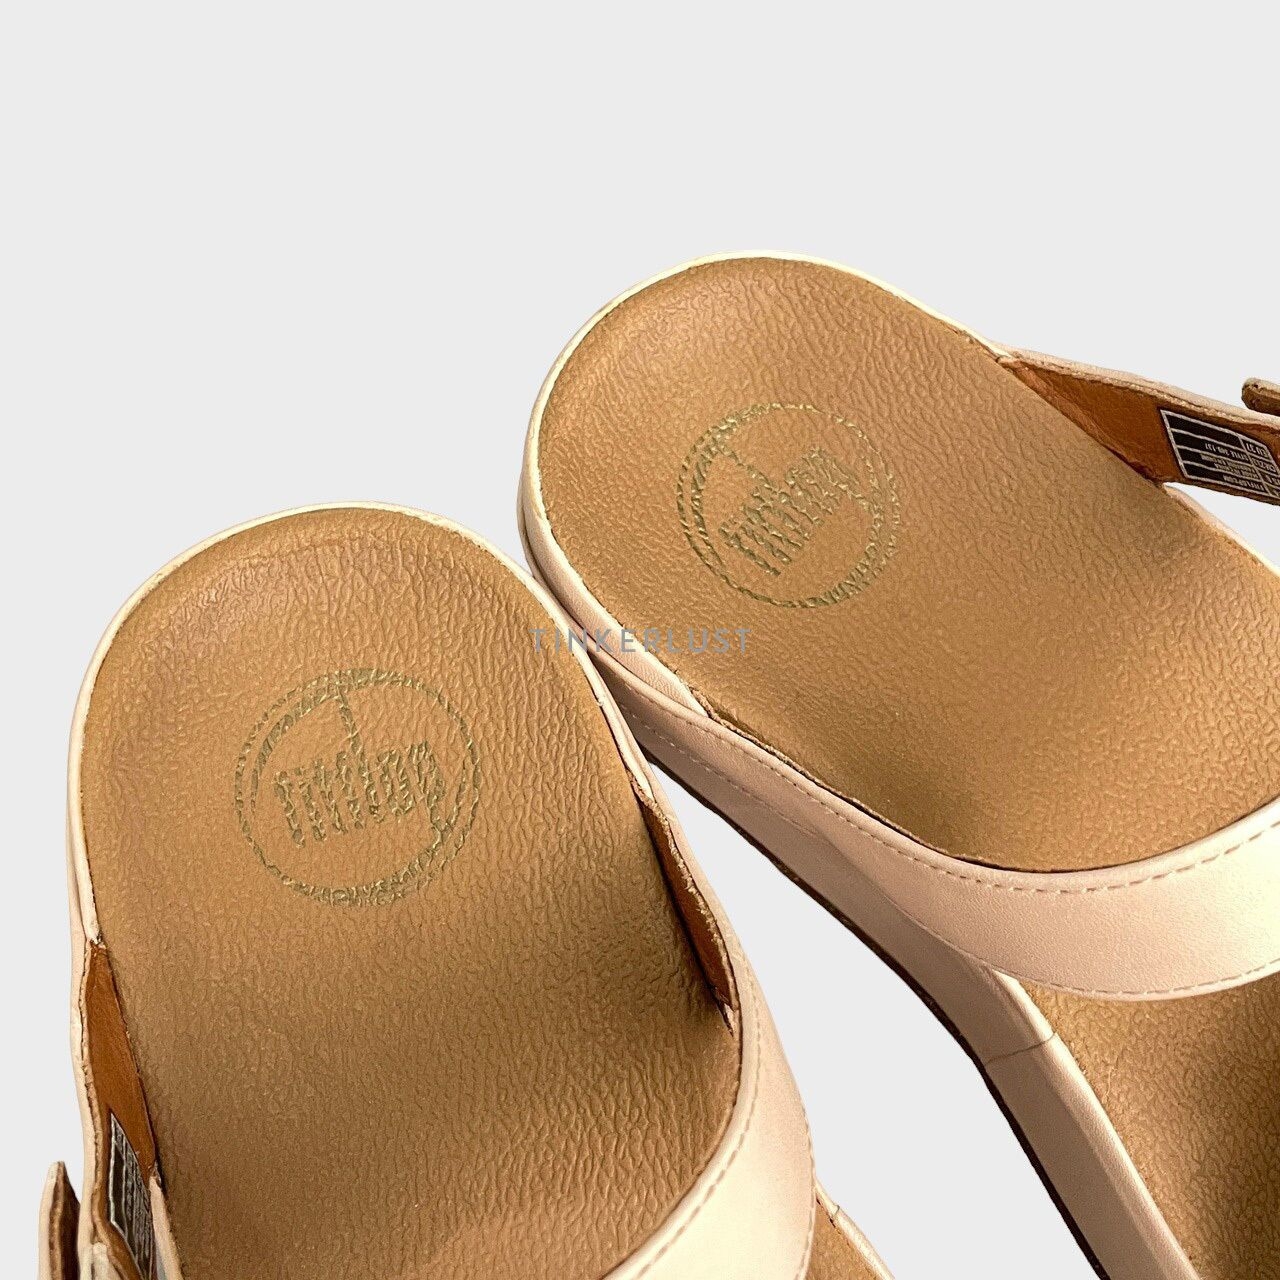 Fitflop Nude Sandals